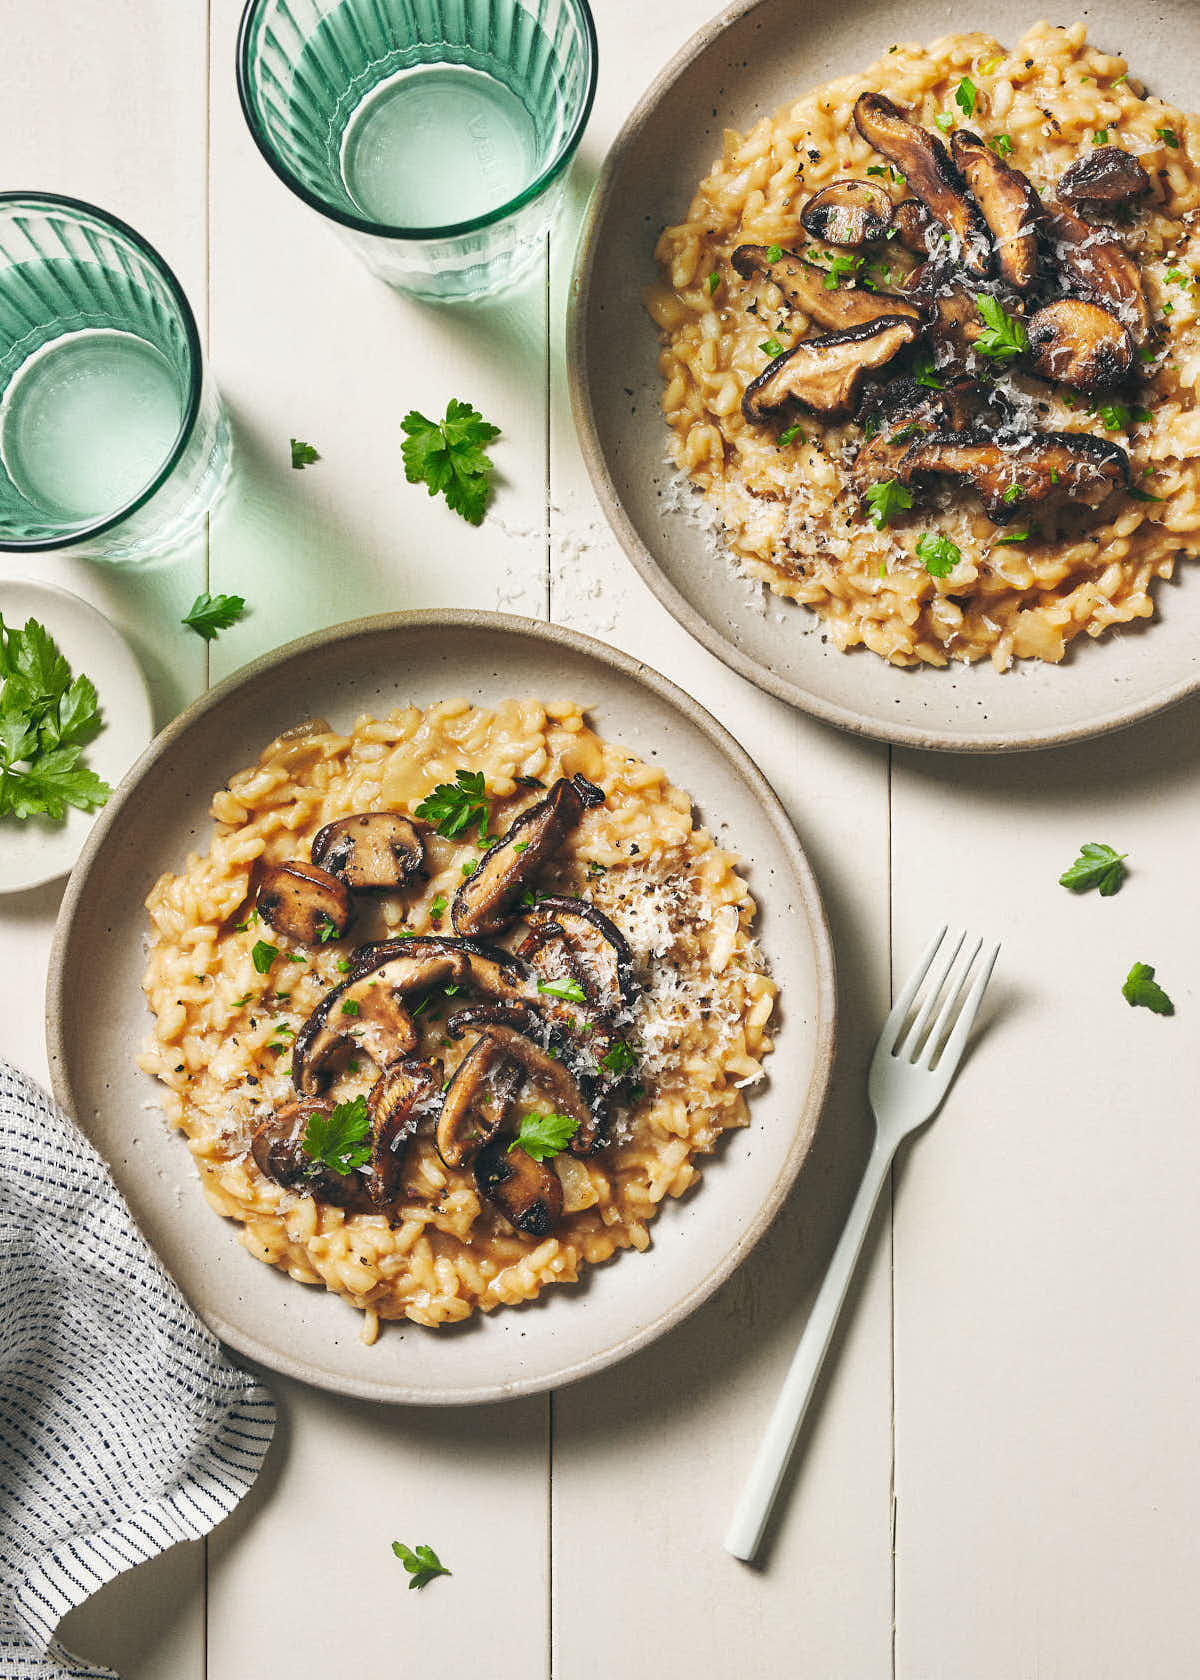 Two bowls of risotto on a wooden table topped with parsley 